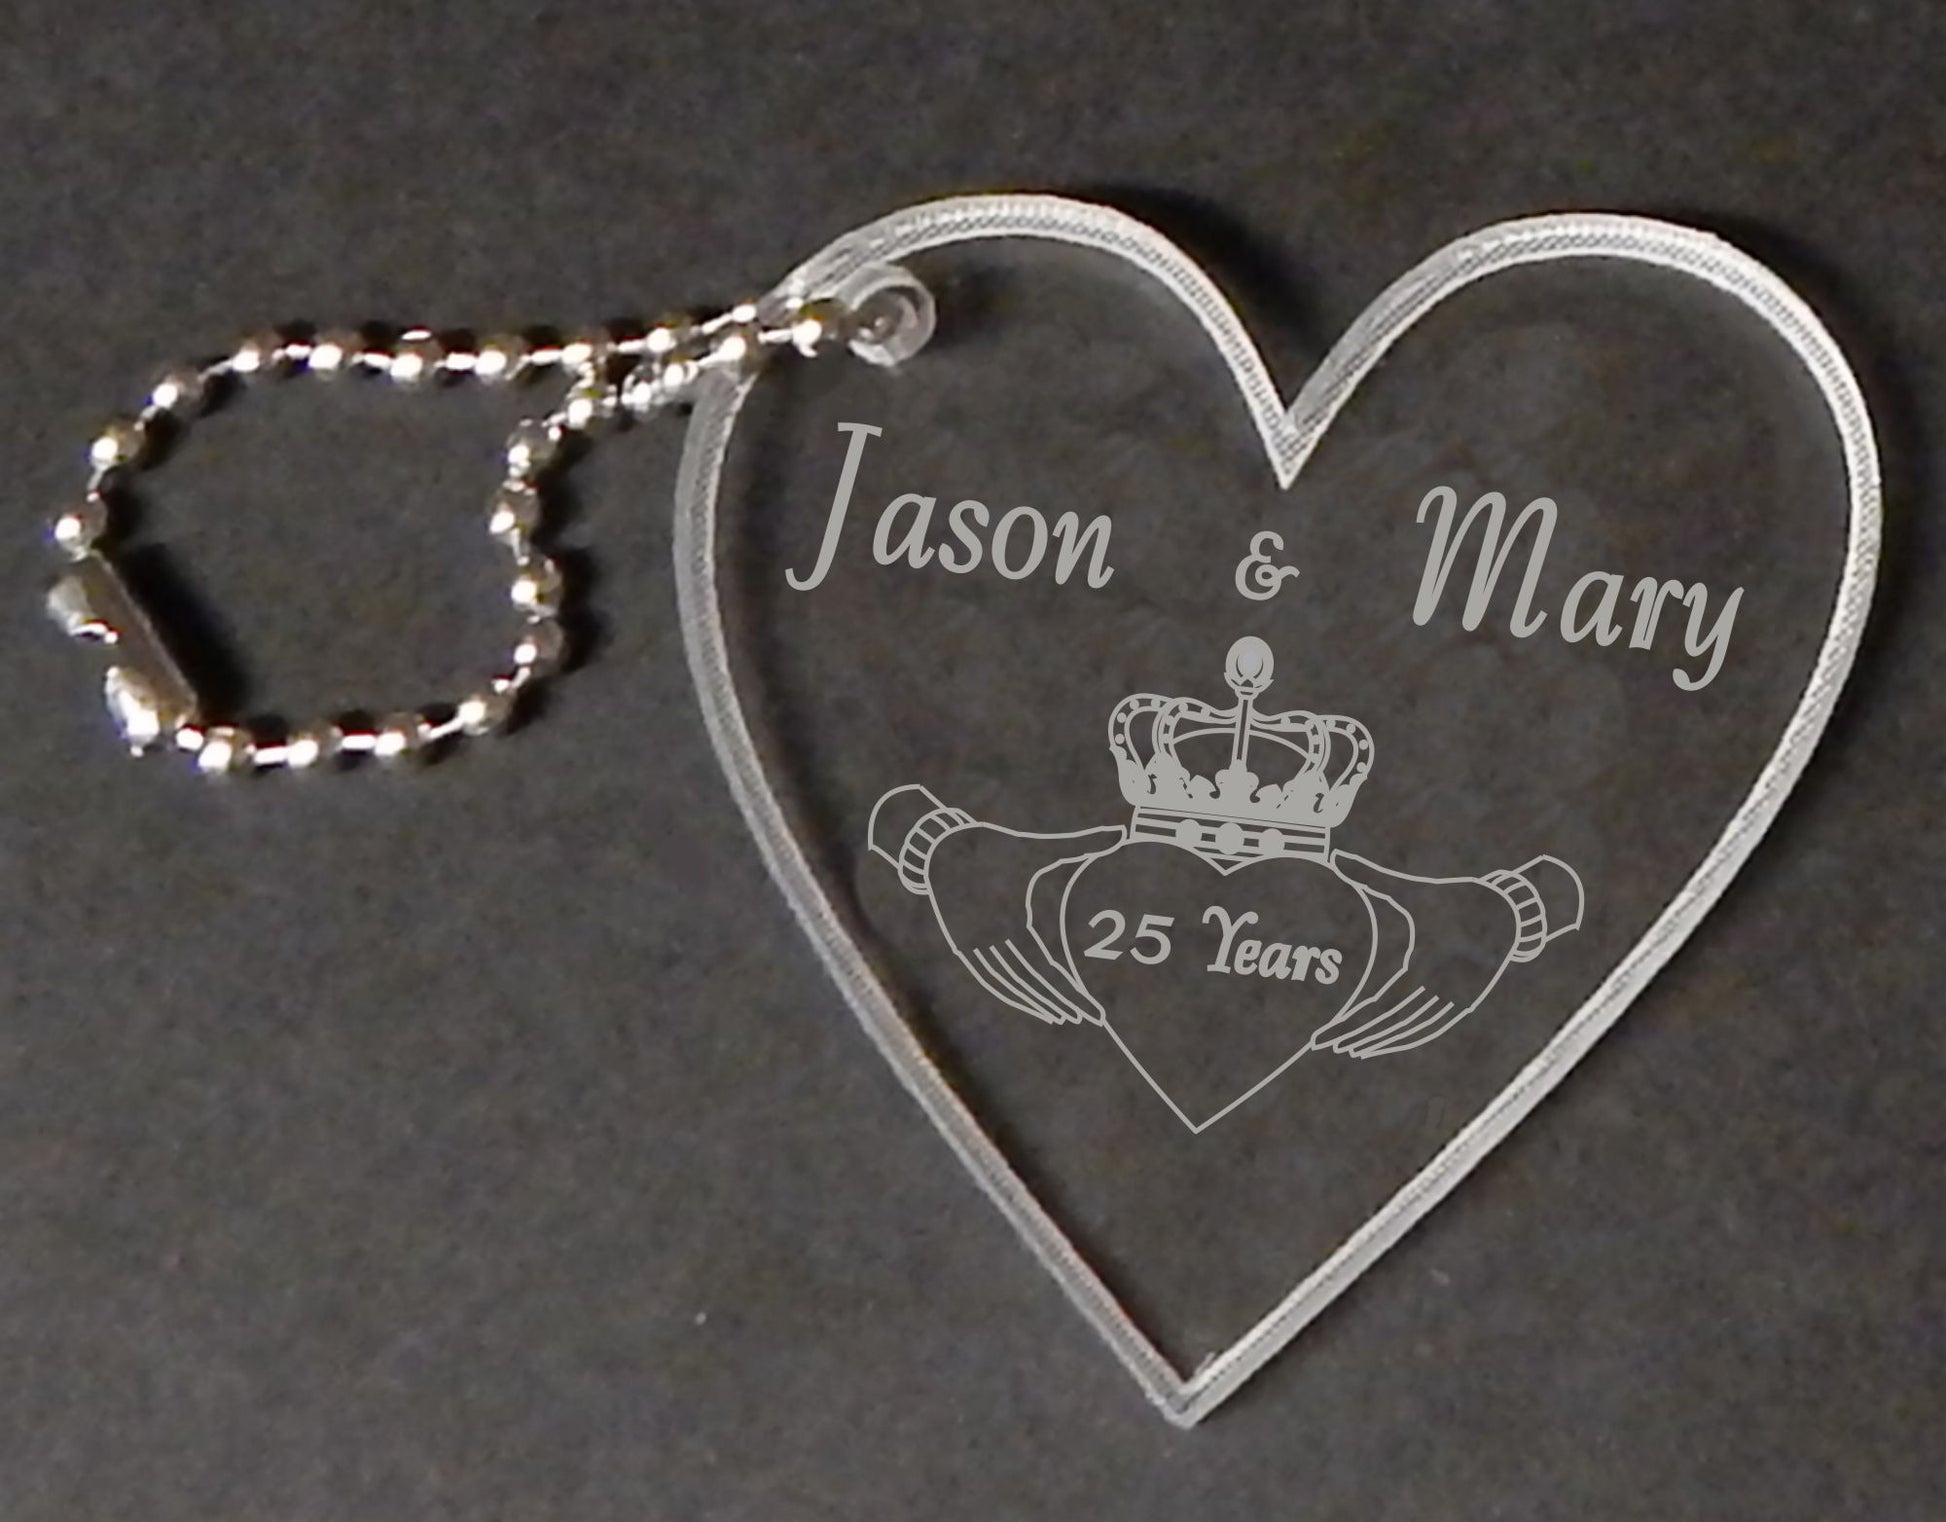 heart shaped acrylic keychain with claddagh design and engraved with names and number of years married, attached to a small metal chain